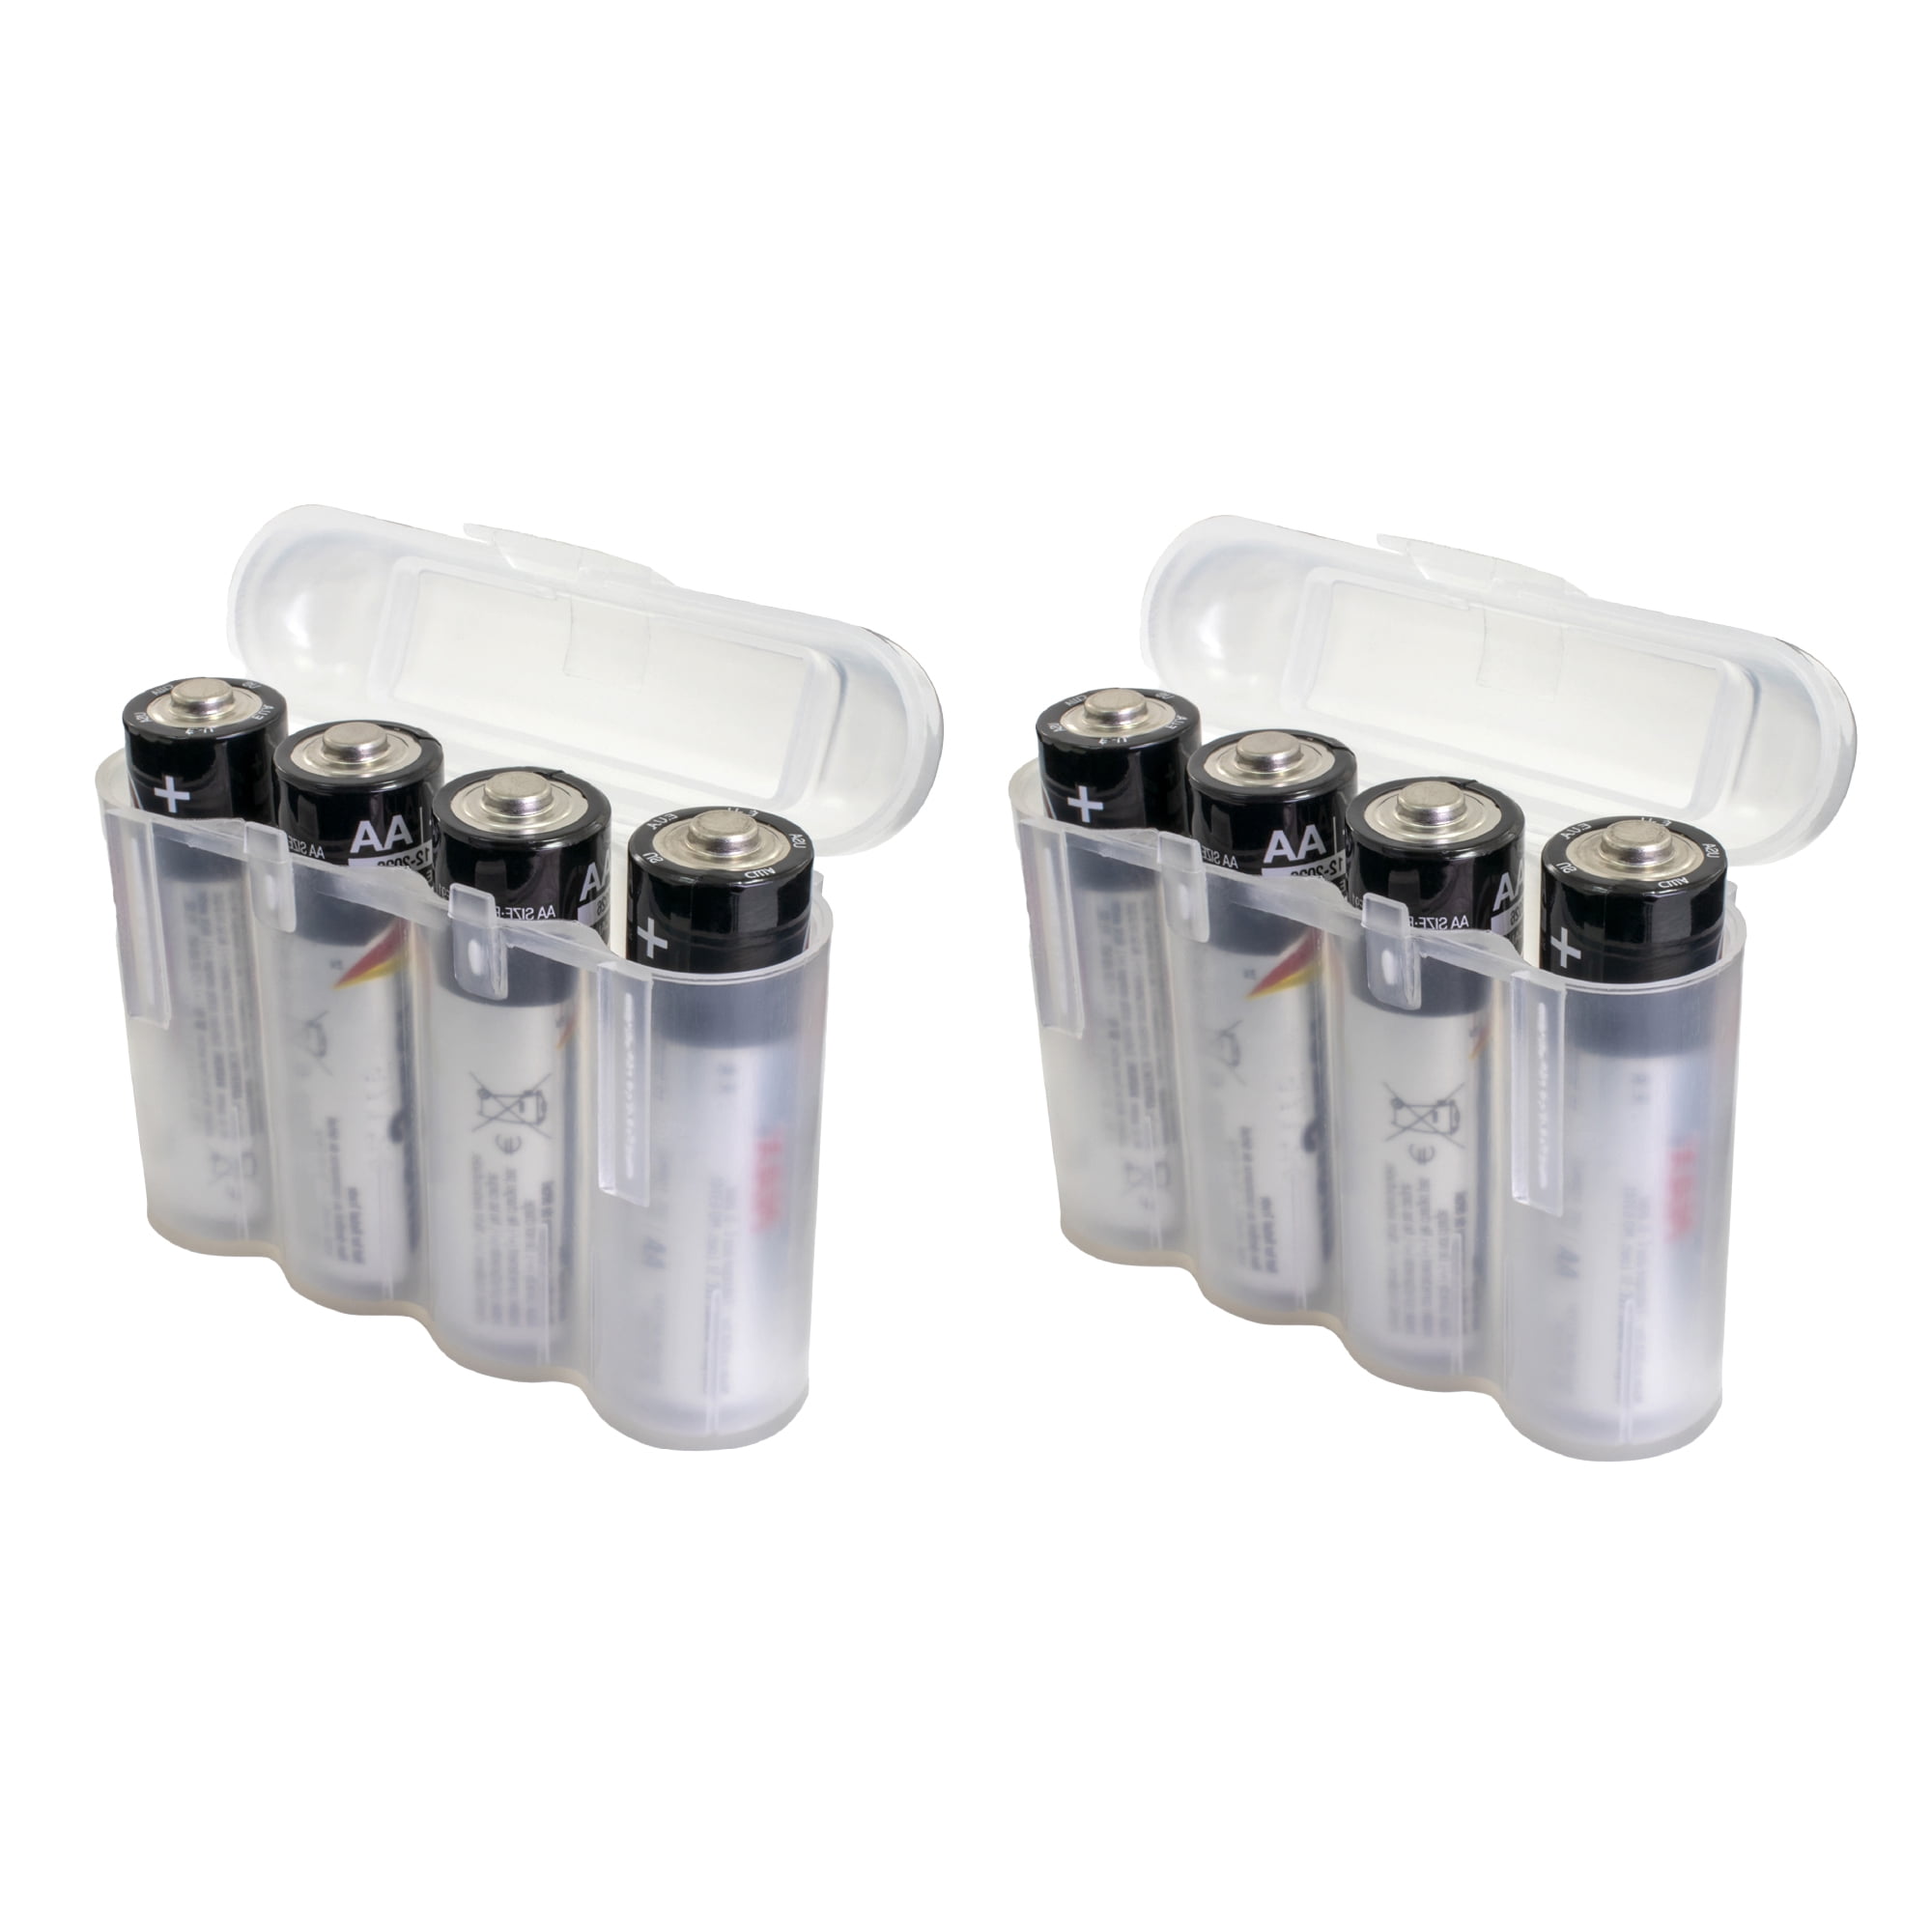 6 Pcs AA AAA Cell Battery Storage Case Holder Organizer Box Clear Hard  Plastic